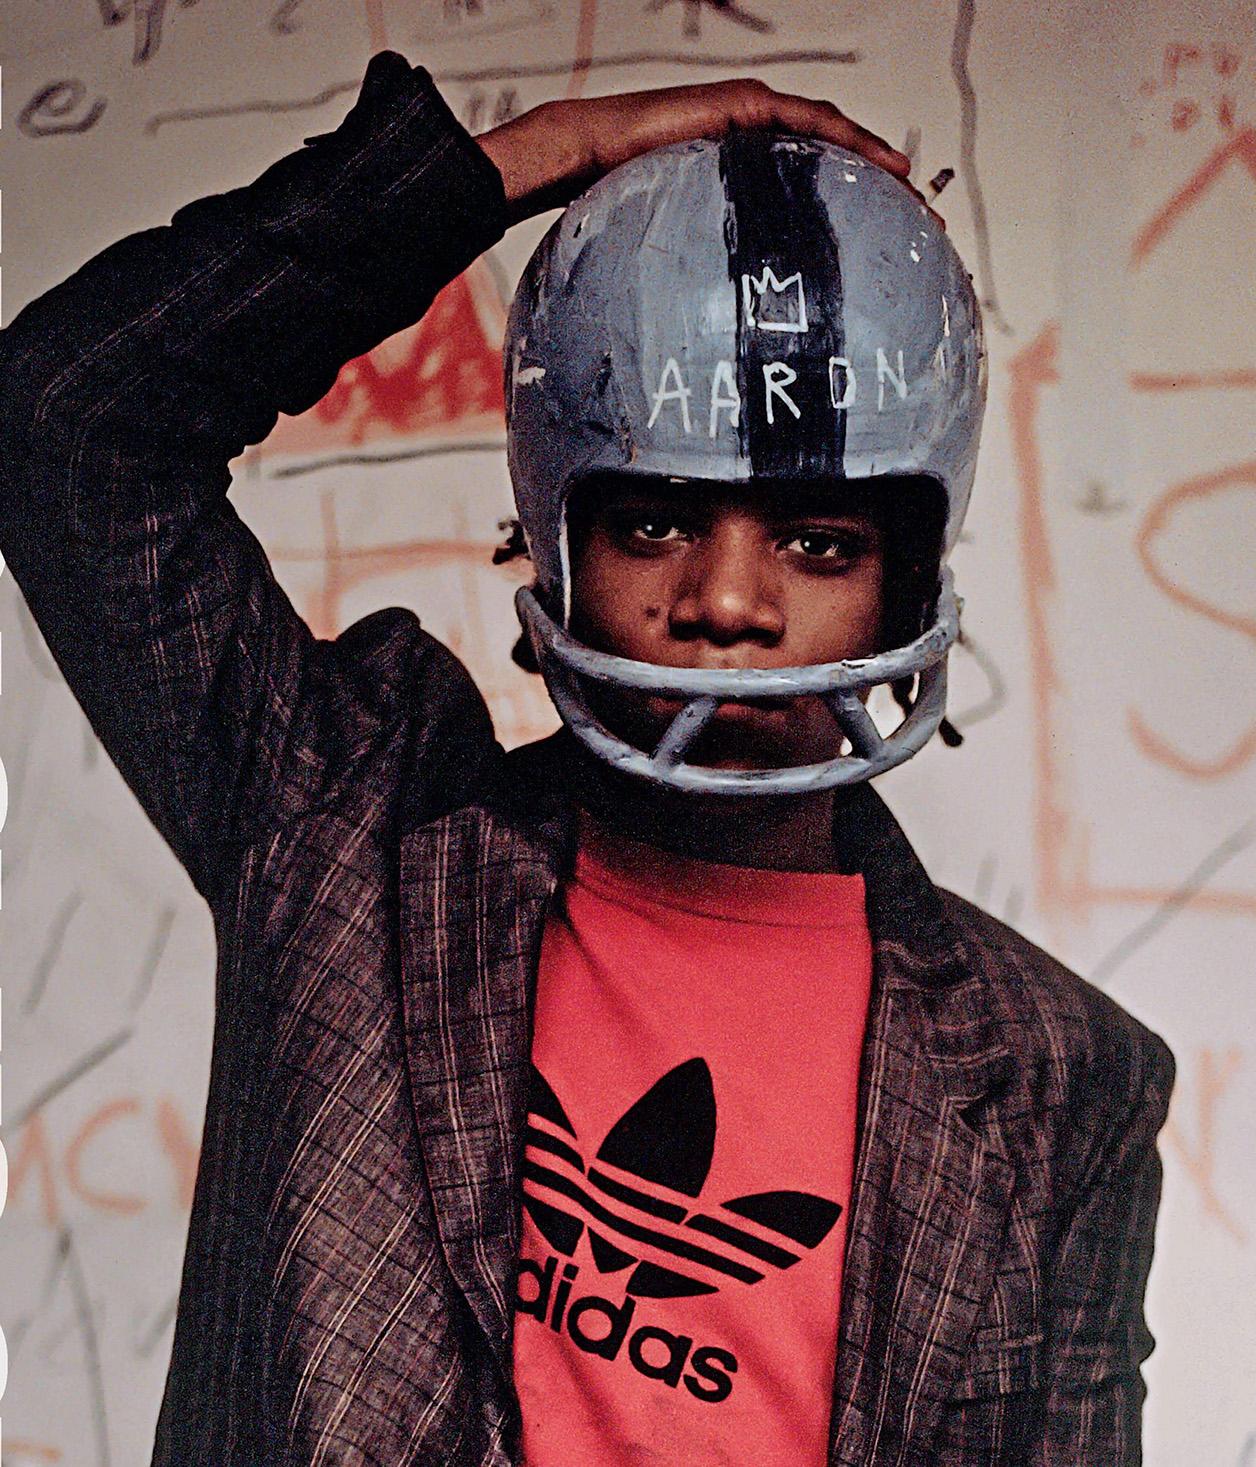 Jean-Michel Basquiat 'Boom for Real':
Original exhibition poster to the much heralded 2017 London exhibition at the Barbican Centre London. Poster is based off the iconic photograph: 'Jean-Michel Basquiat Wearing an American Football Helmet', 1981